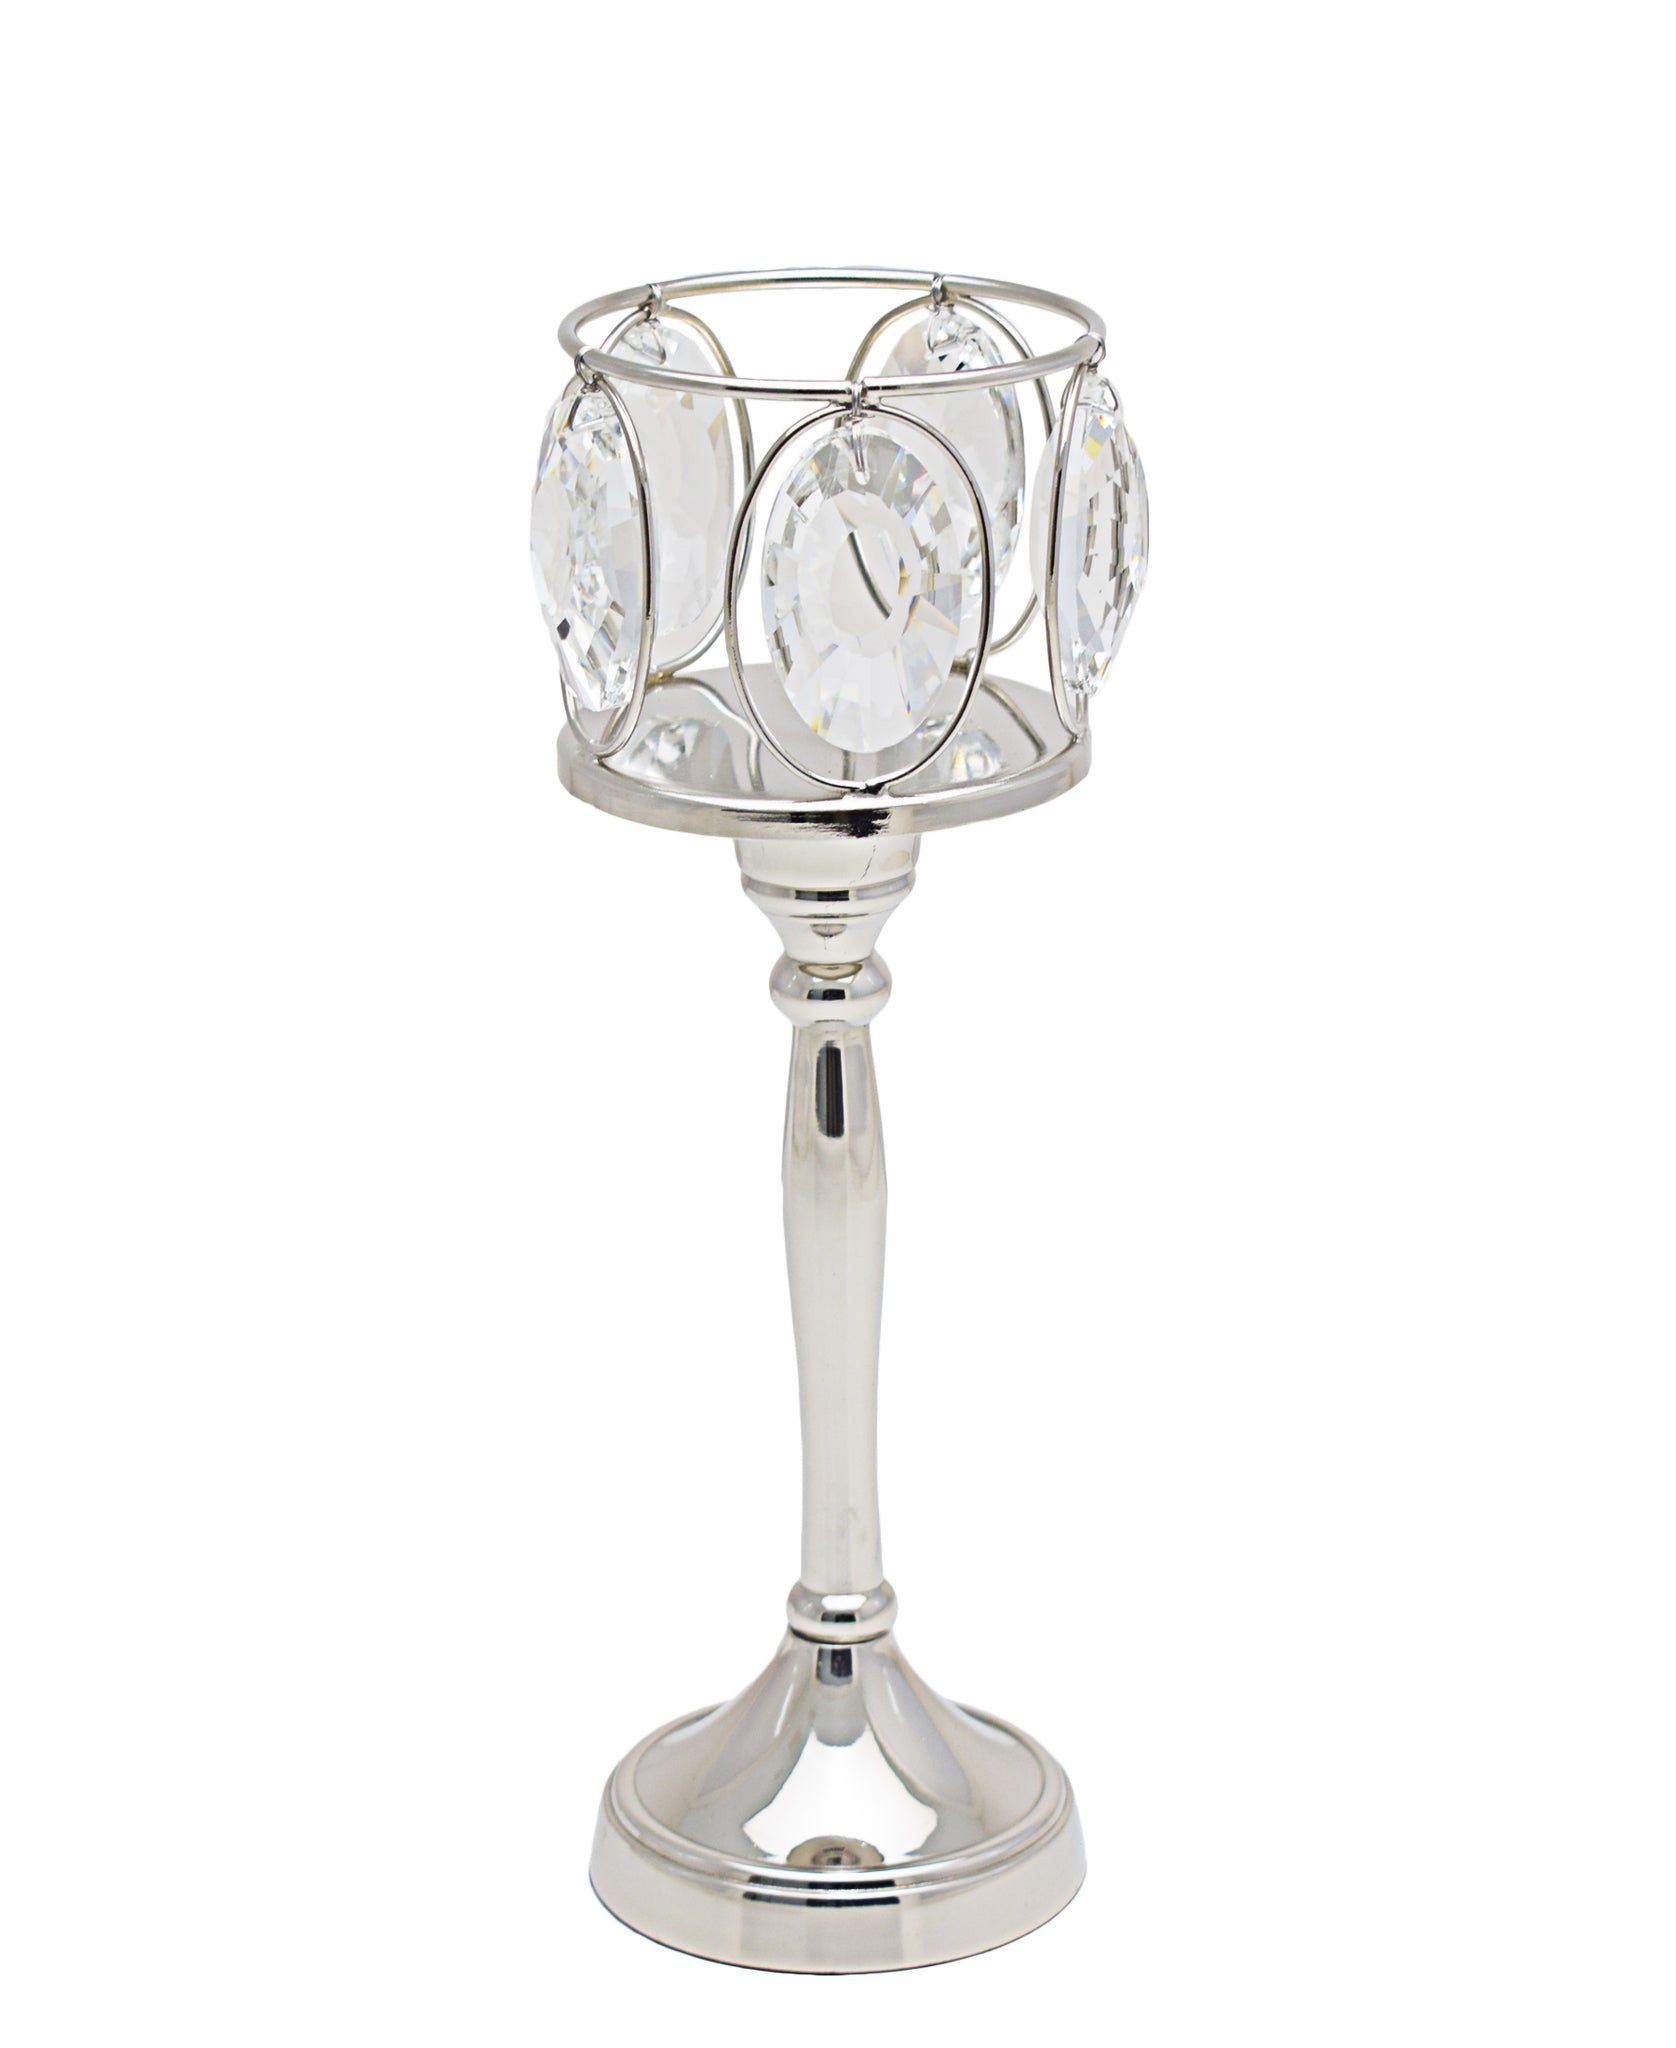 Majestic Crystal T Light On Stand Medium - Silver